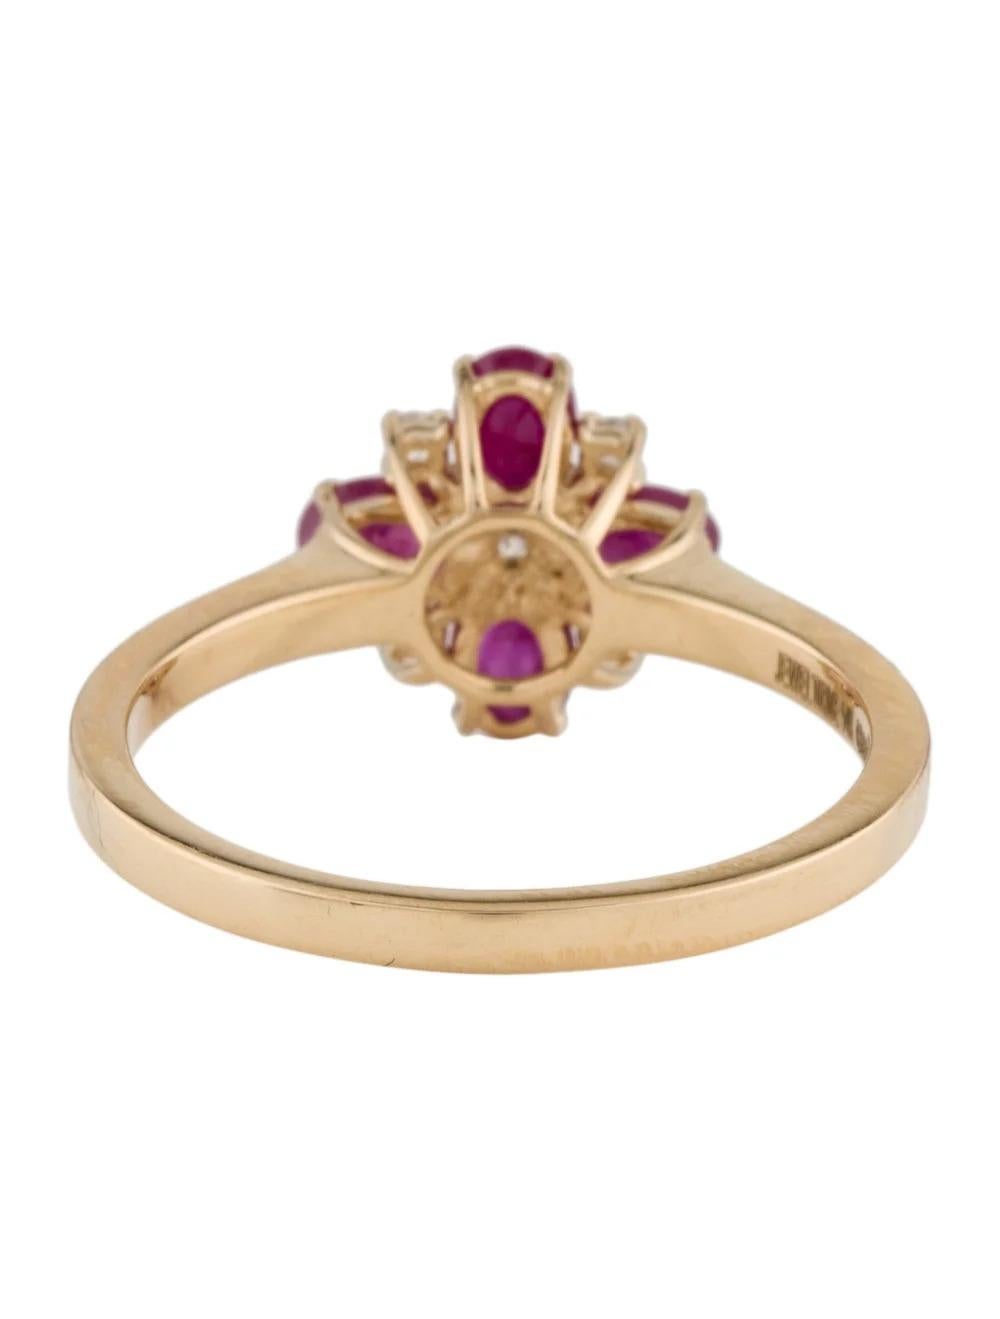 14K Ruby & Diamond Cocktail Ring, Size 6.75 - Stunning Design, Statement Jewelry In New Condition For Sale In Holtsville, NY